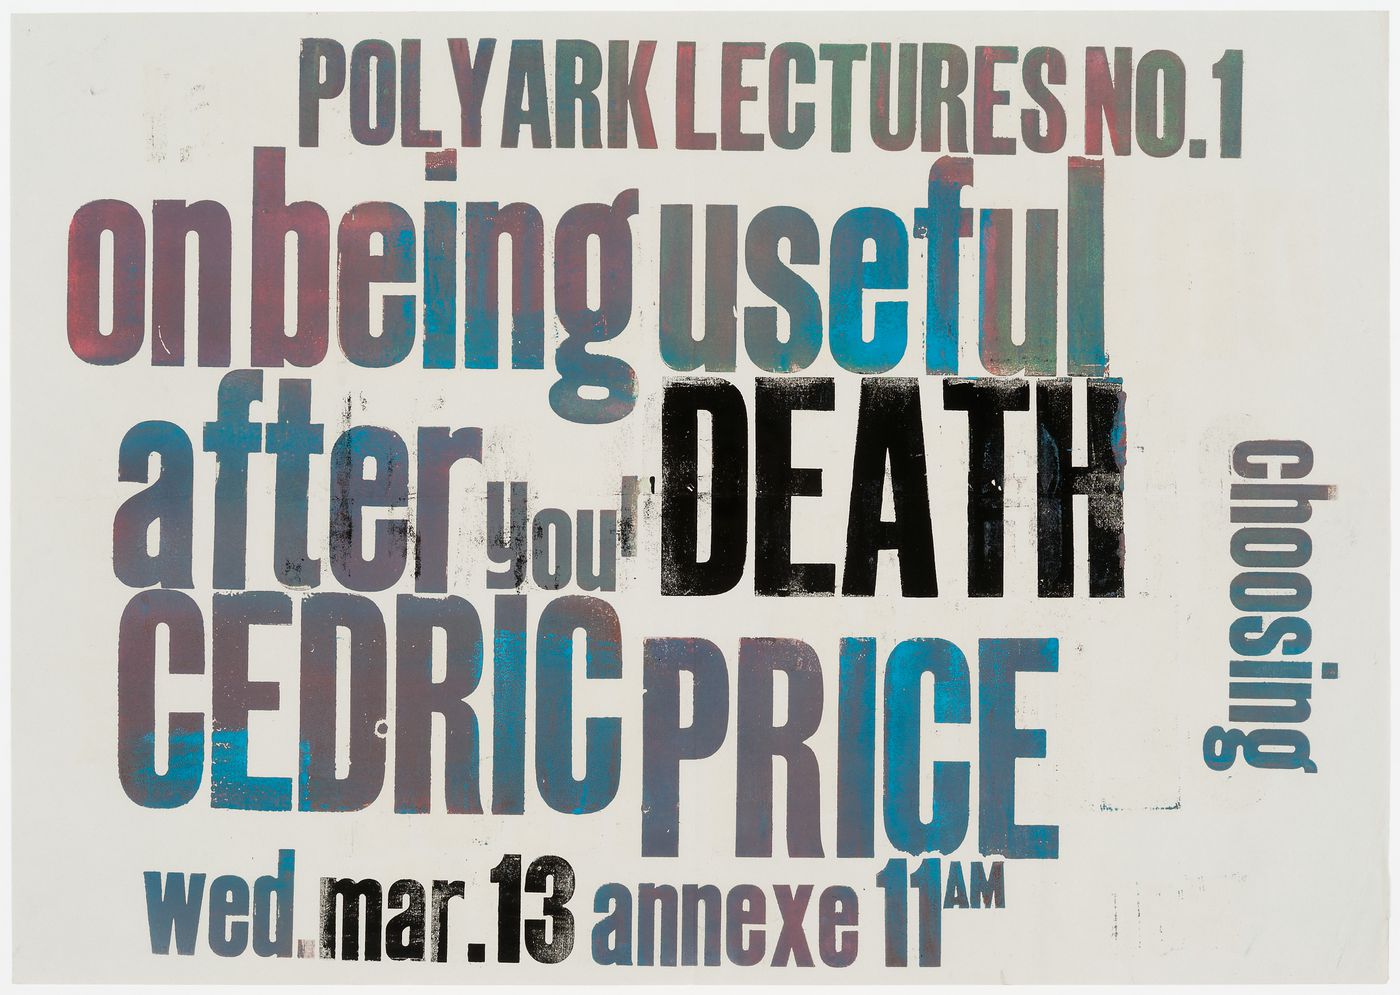 Poster advertising a Polyark lecture by Cedric Price